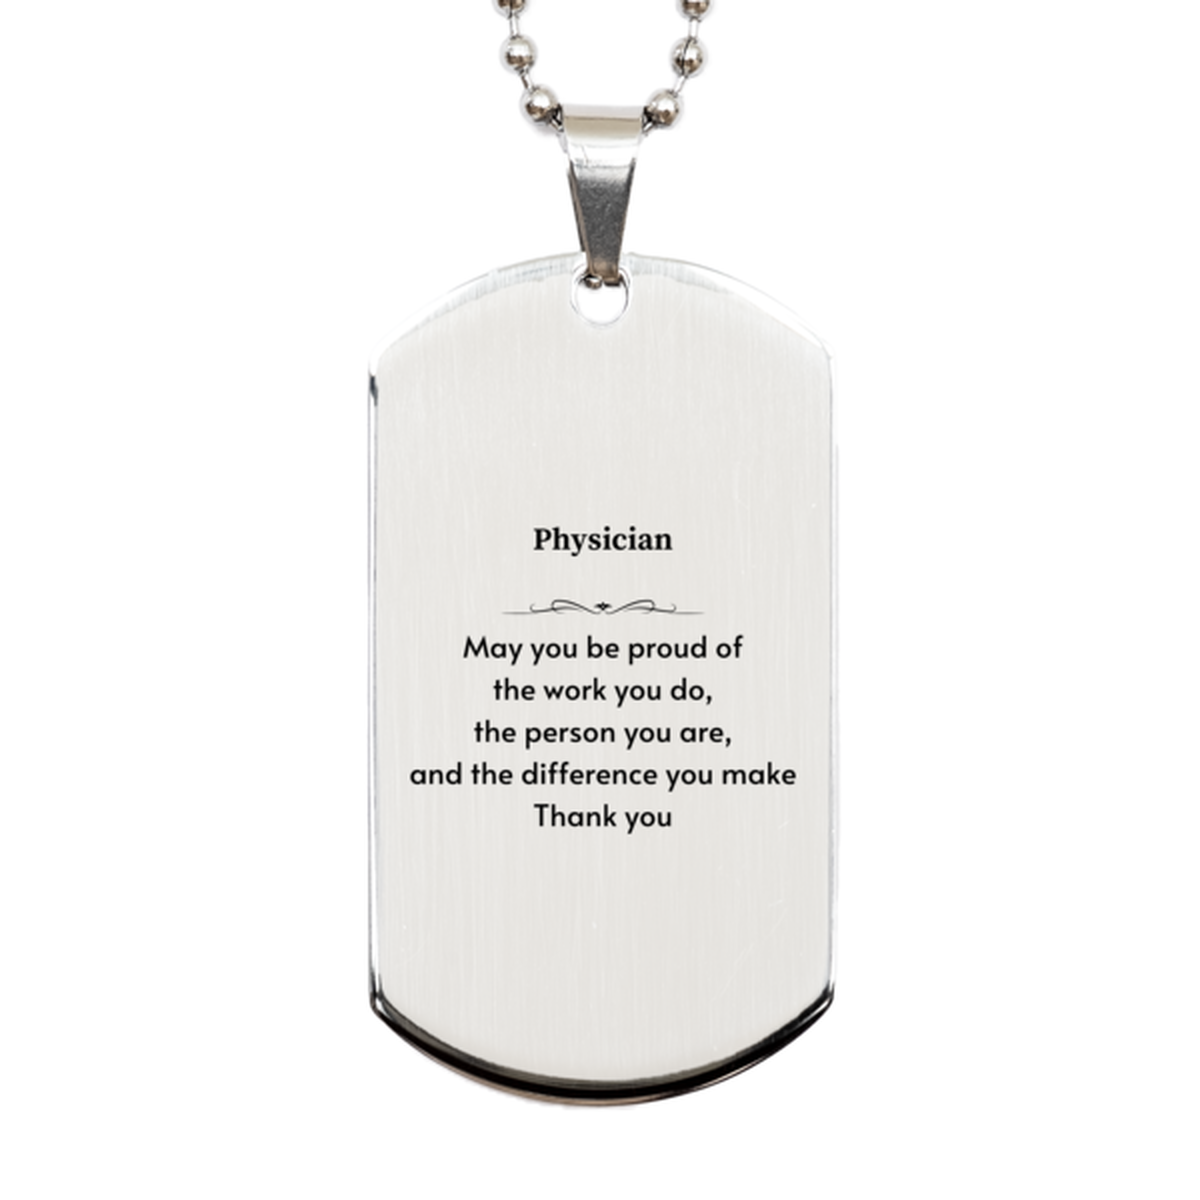 Heartwarming Silver Dog Tag Retirement Coworkers Gifts for Physician, Physician May You be proud of the work you do, the person you are Gifts for Boss Men Women Friends